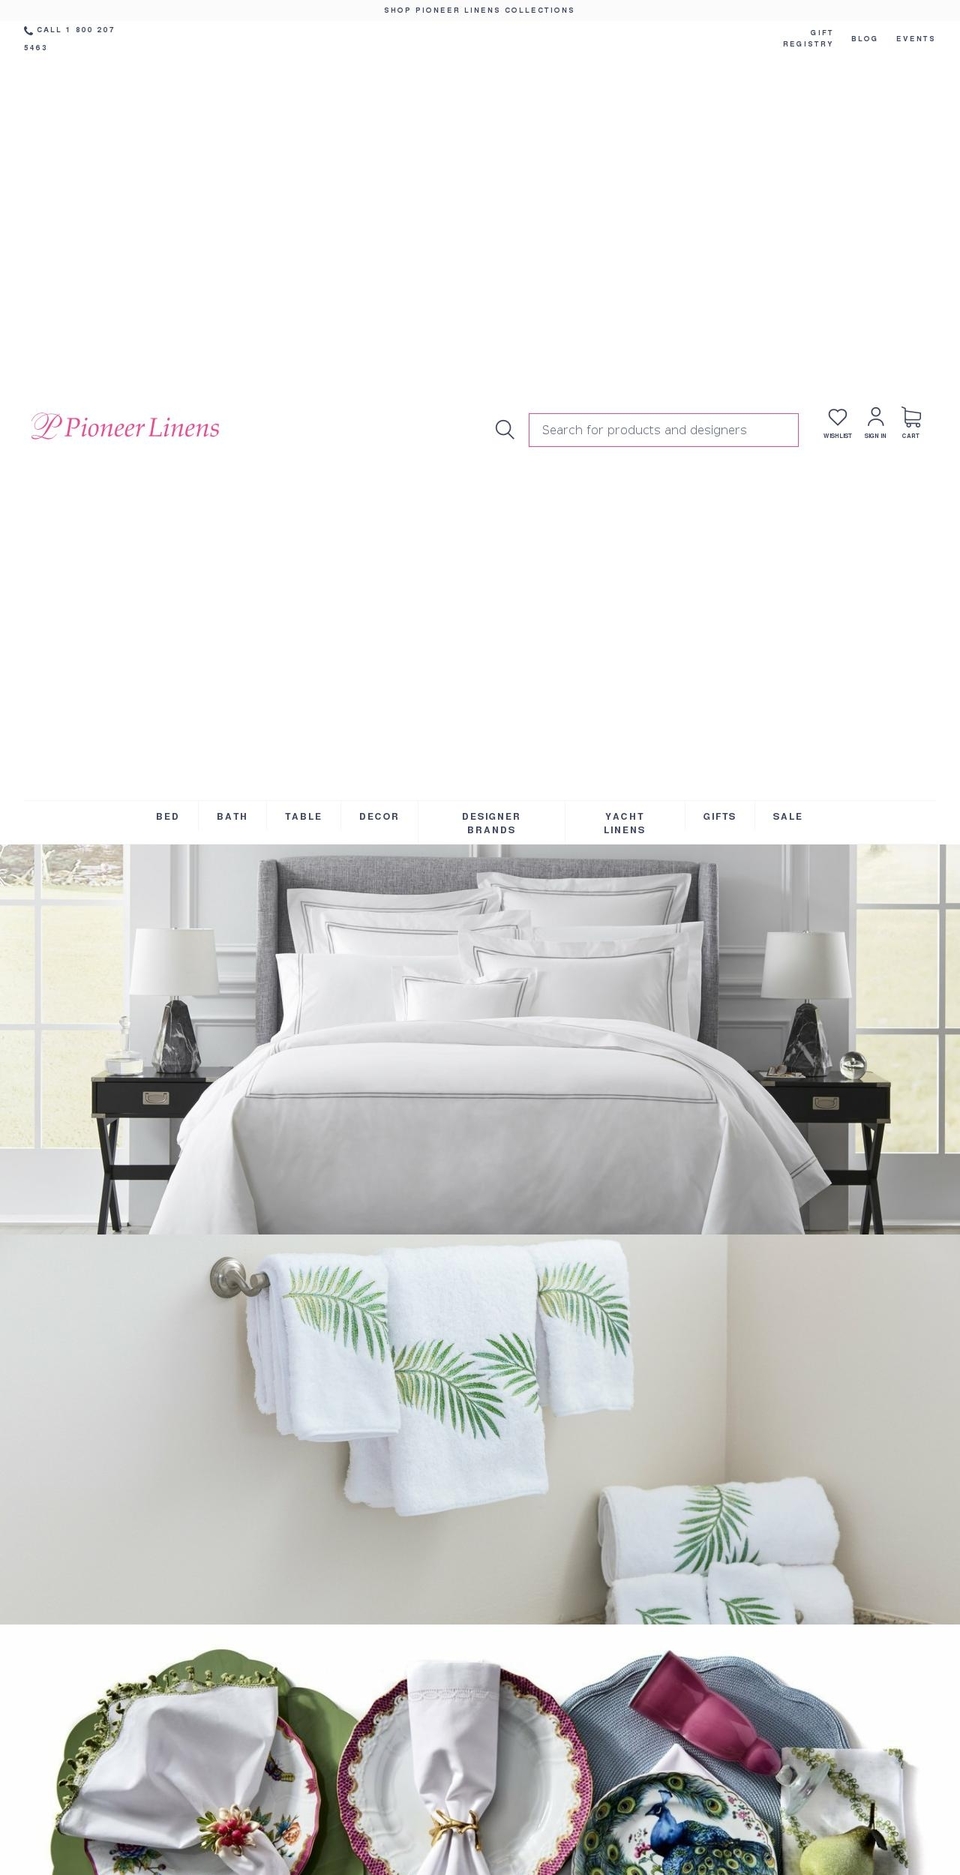 Buko Shopify Theme - Products Consolidation Shopify theme site example pioneerbathlinens.com